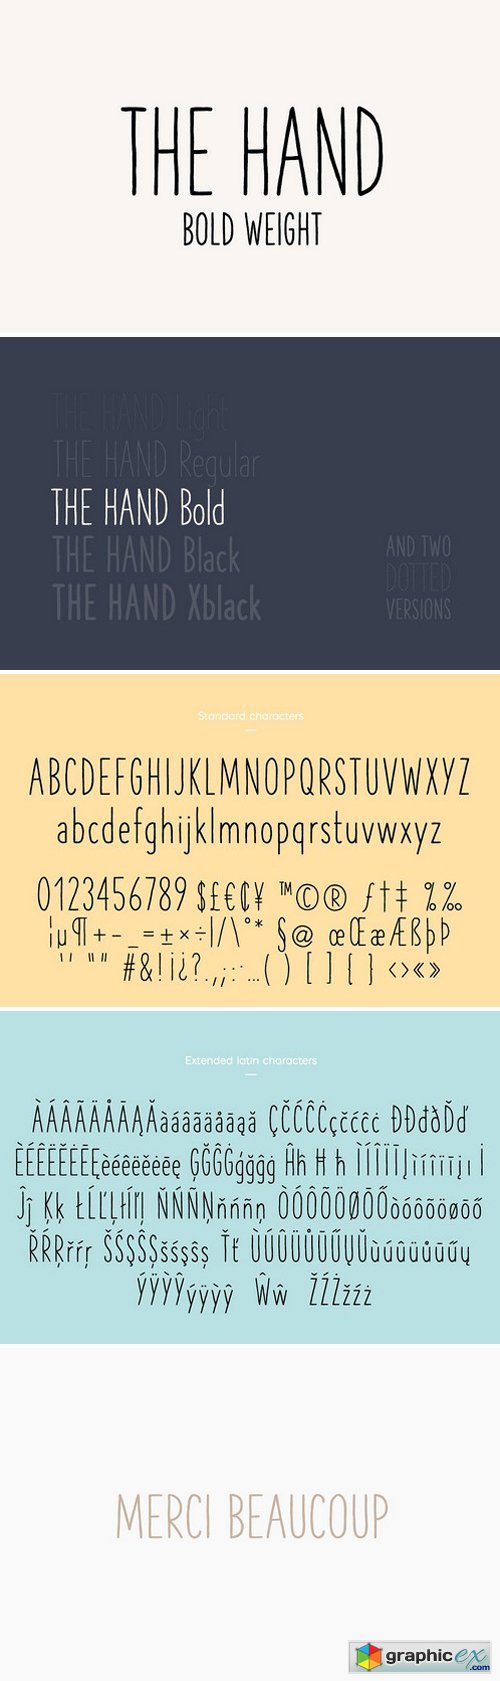 The Hand Font - Bold